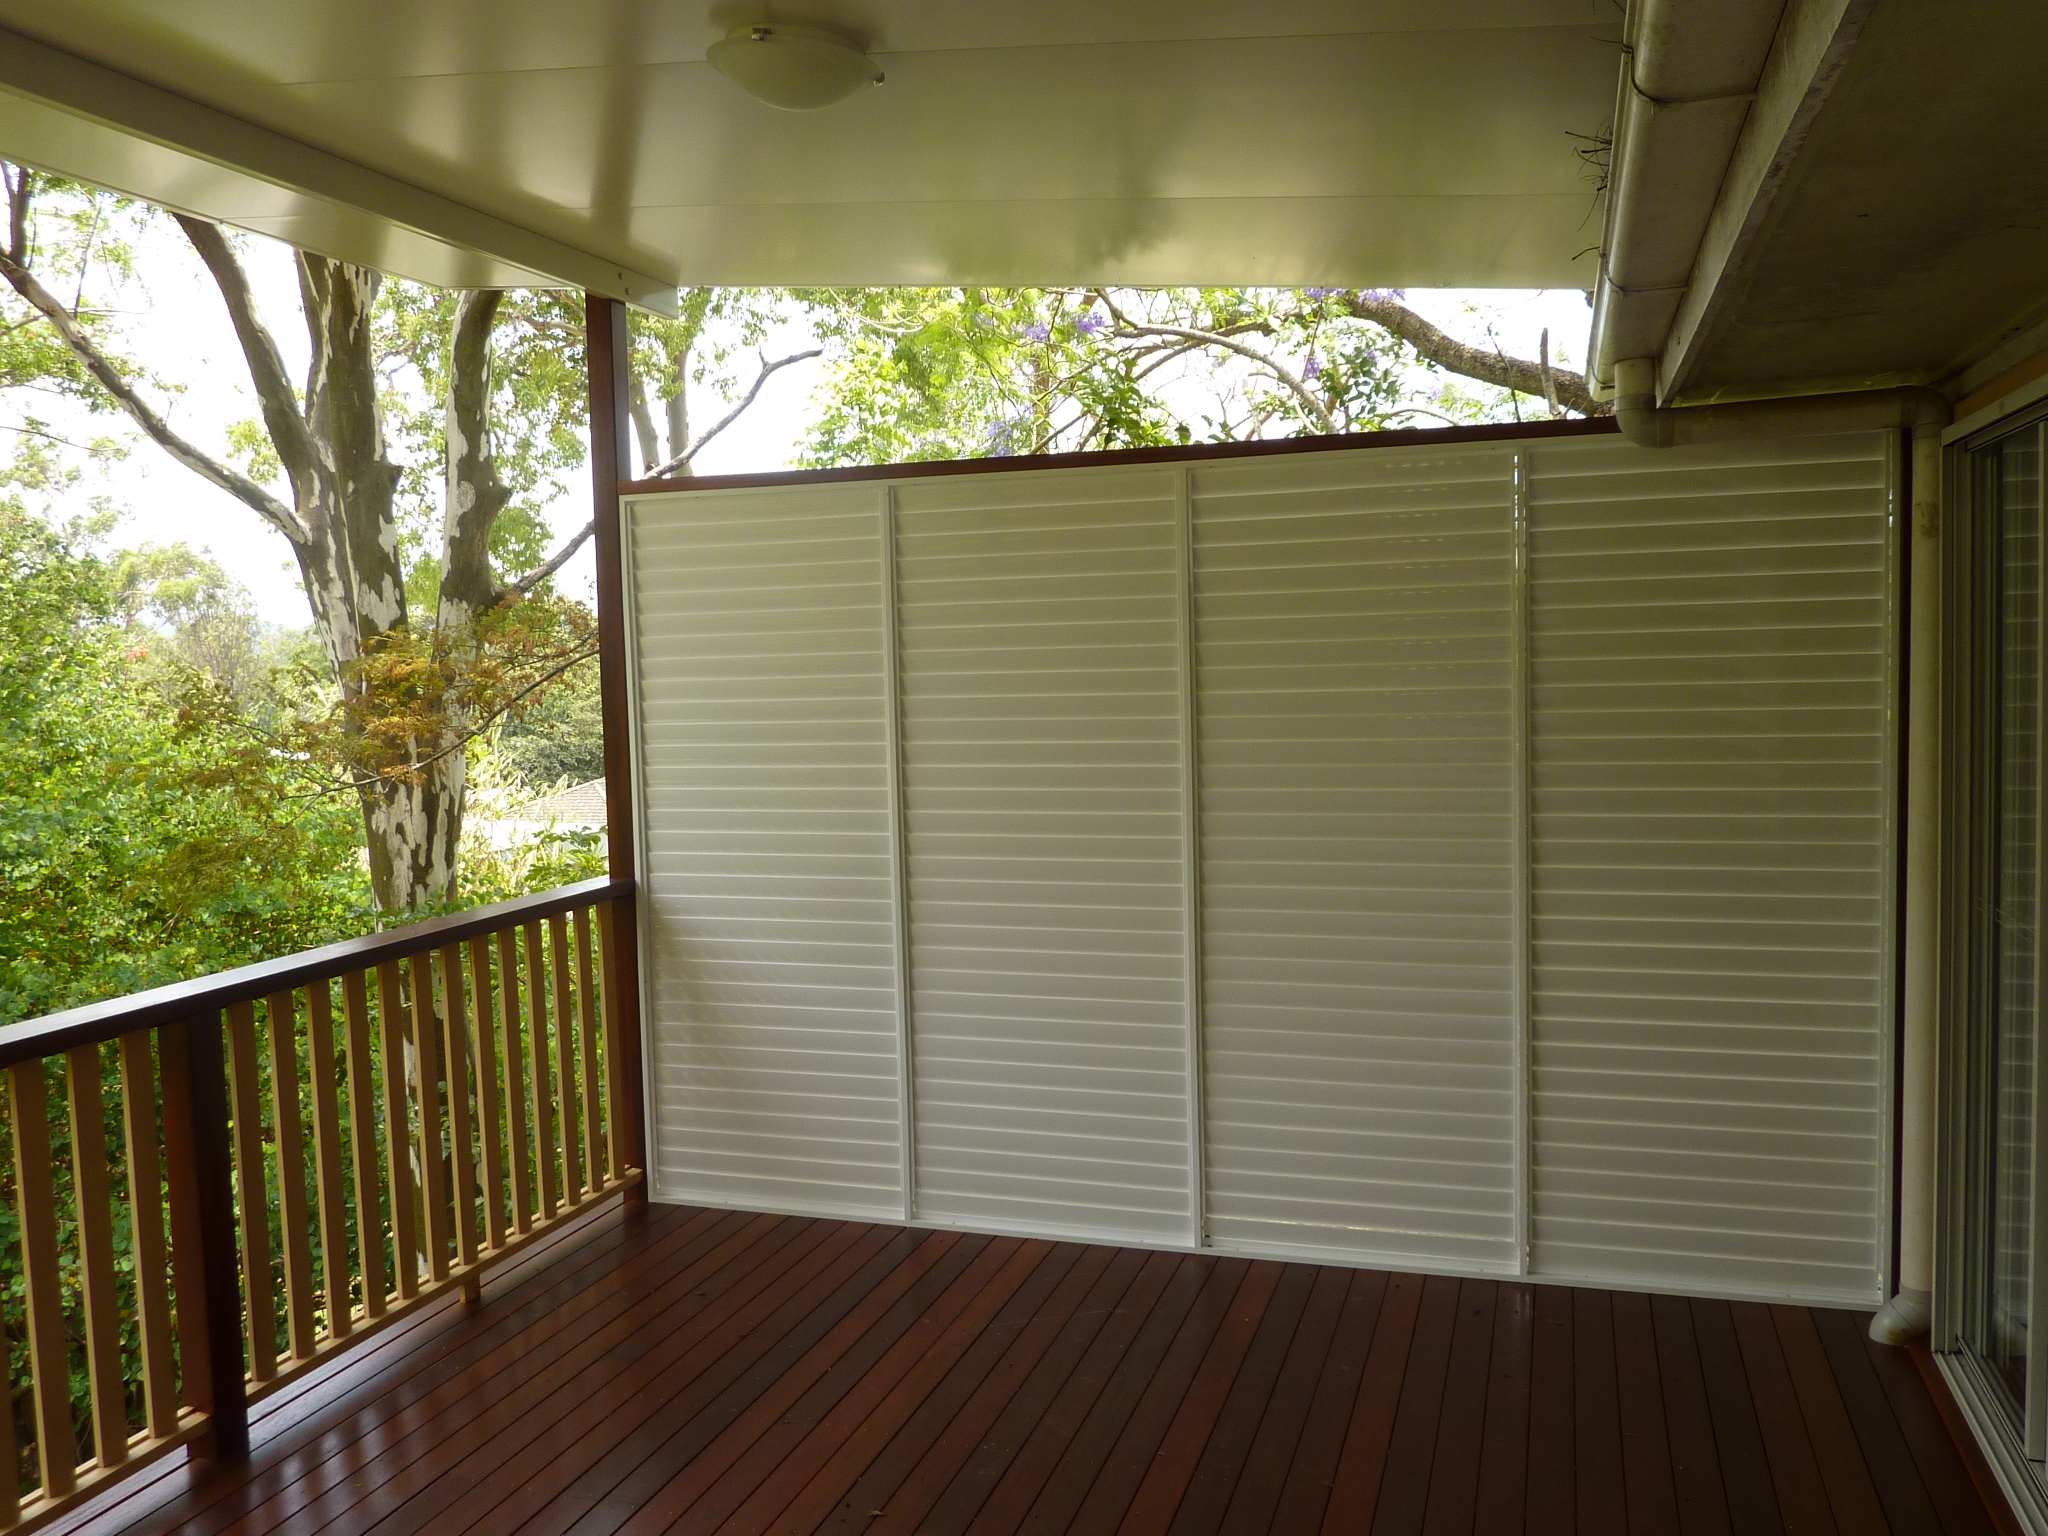 A deck with a built in privacy screen